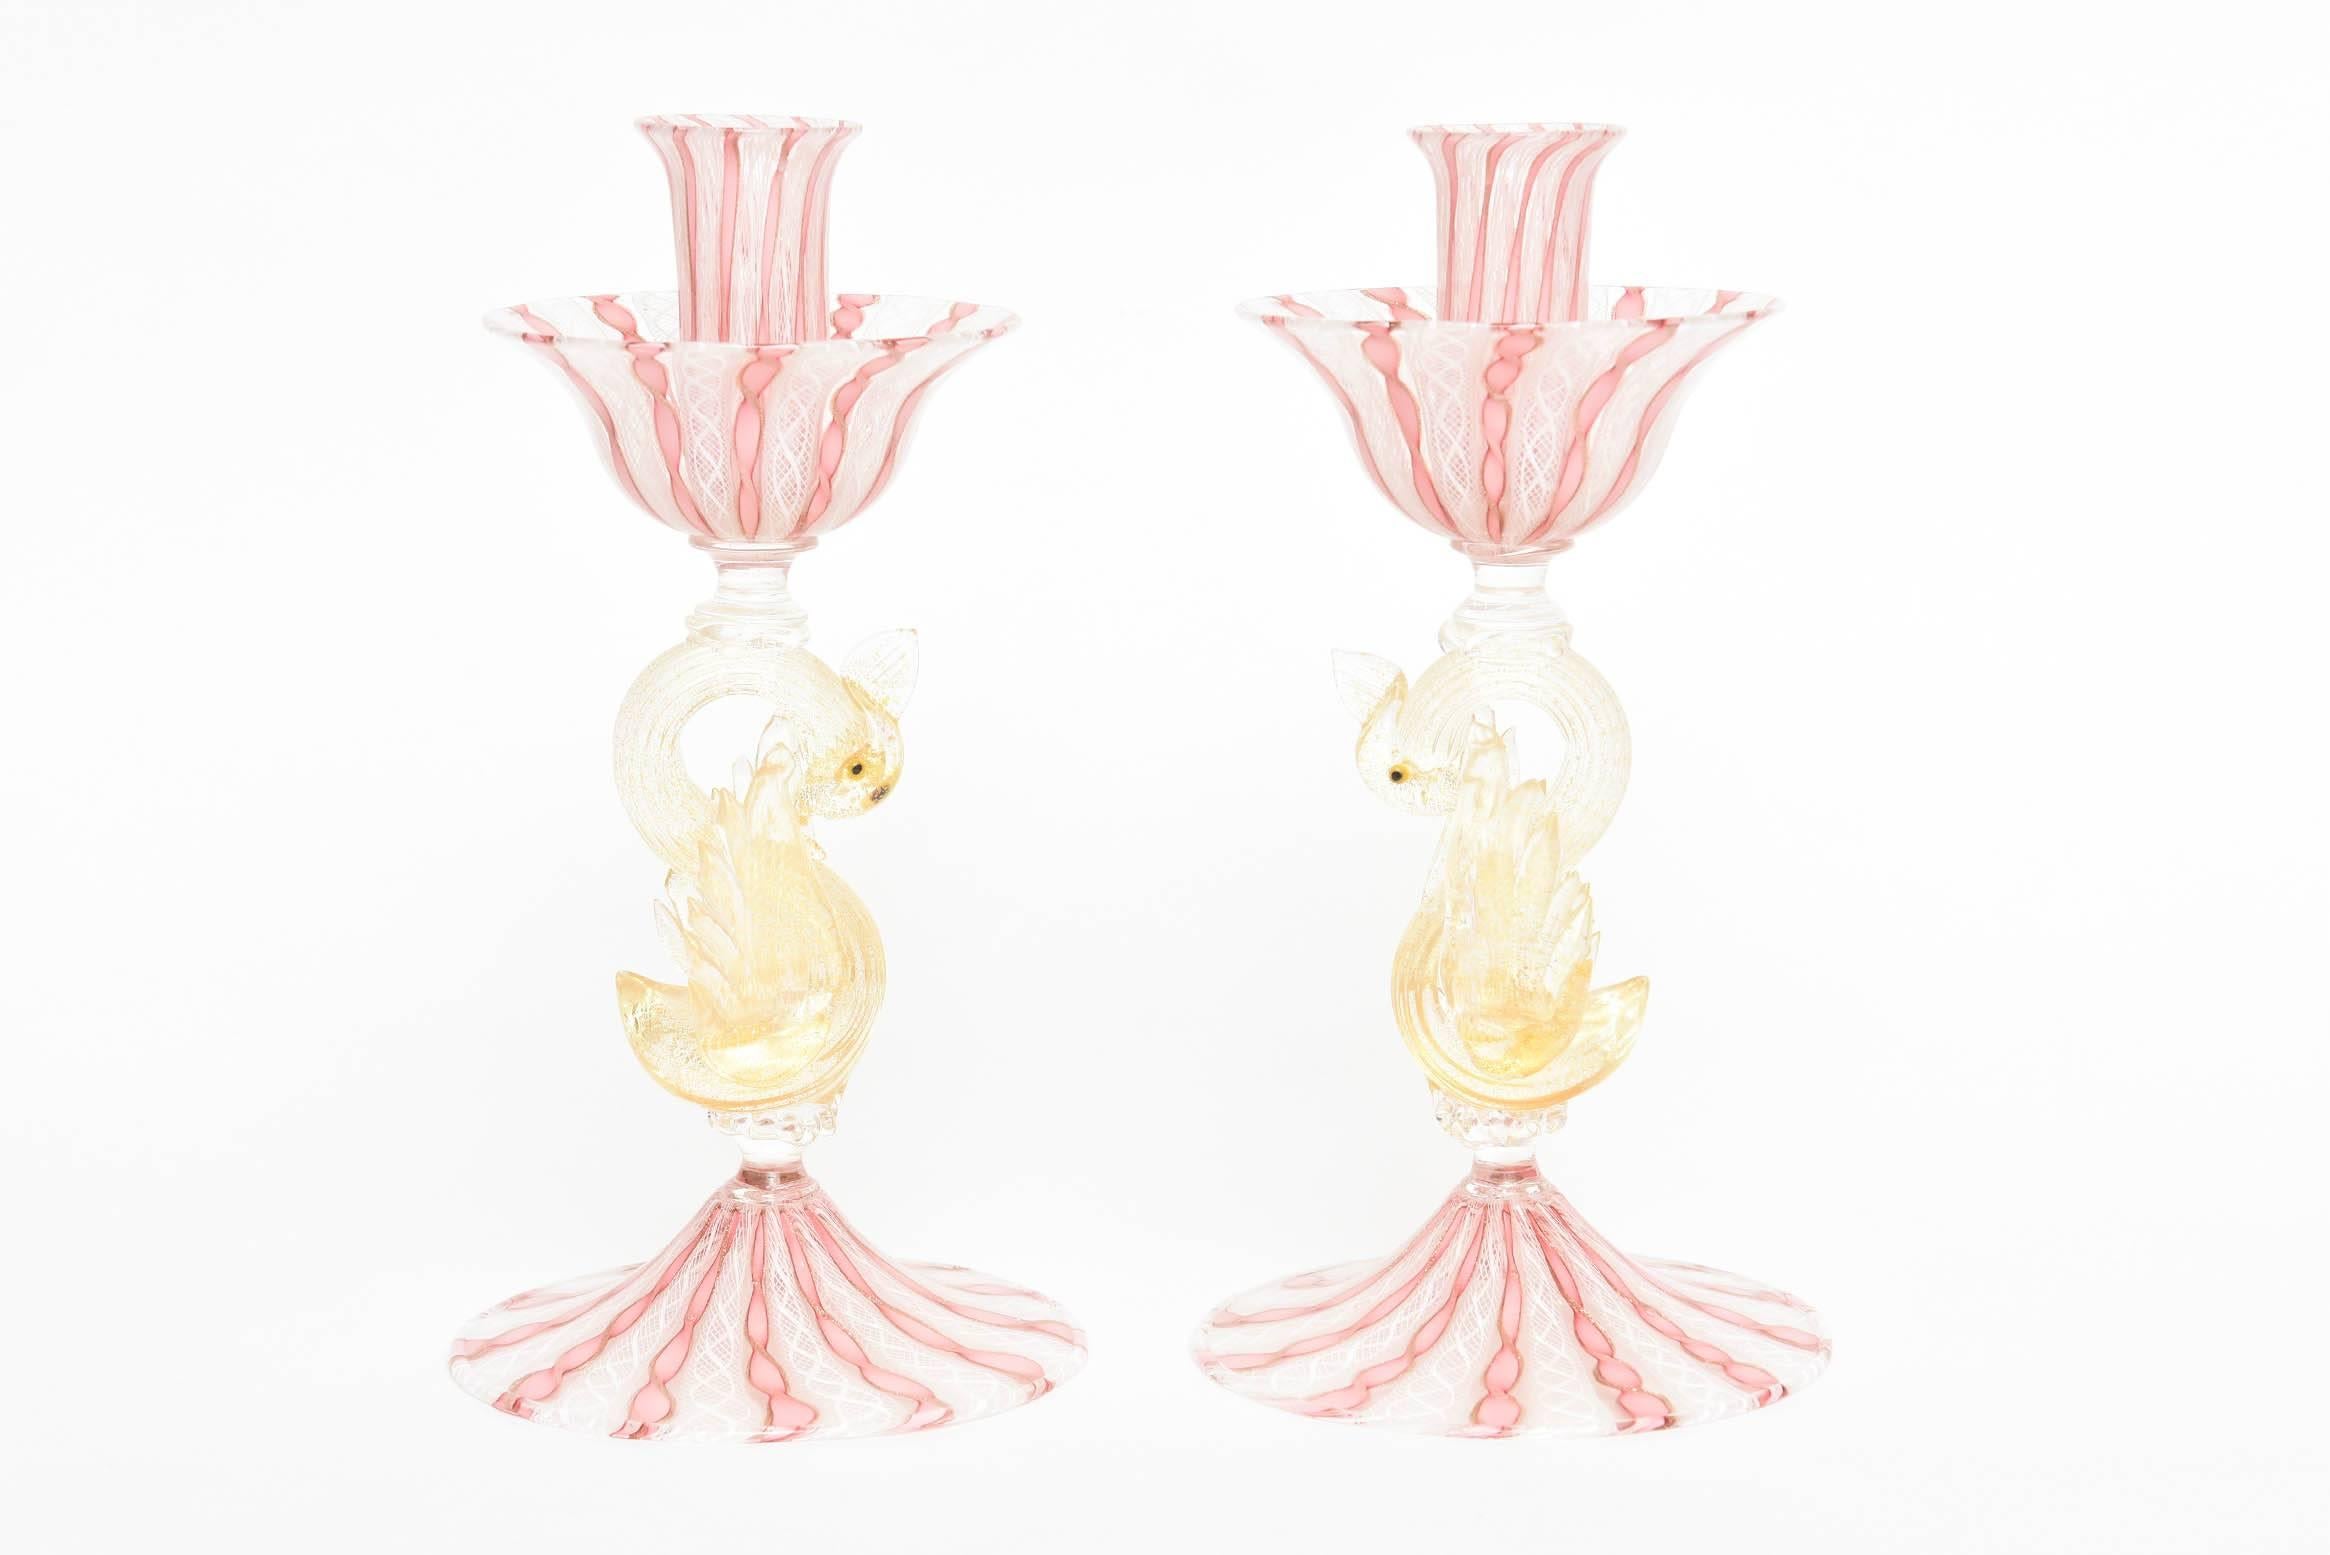 So pretty in pink, these delightful vintage candleholders are just beautiful on their own and feature large detailed swans supporting elongated bobeches and a nicely sculpted wide base. 24-karat gold is accented nicely throughout and they are in